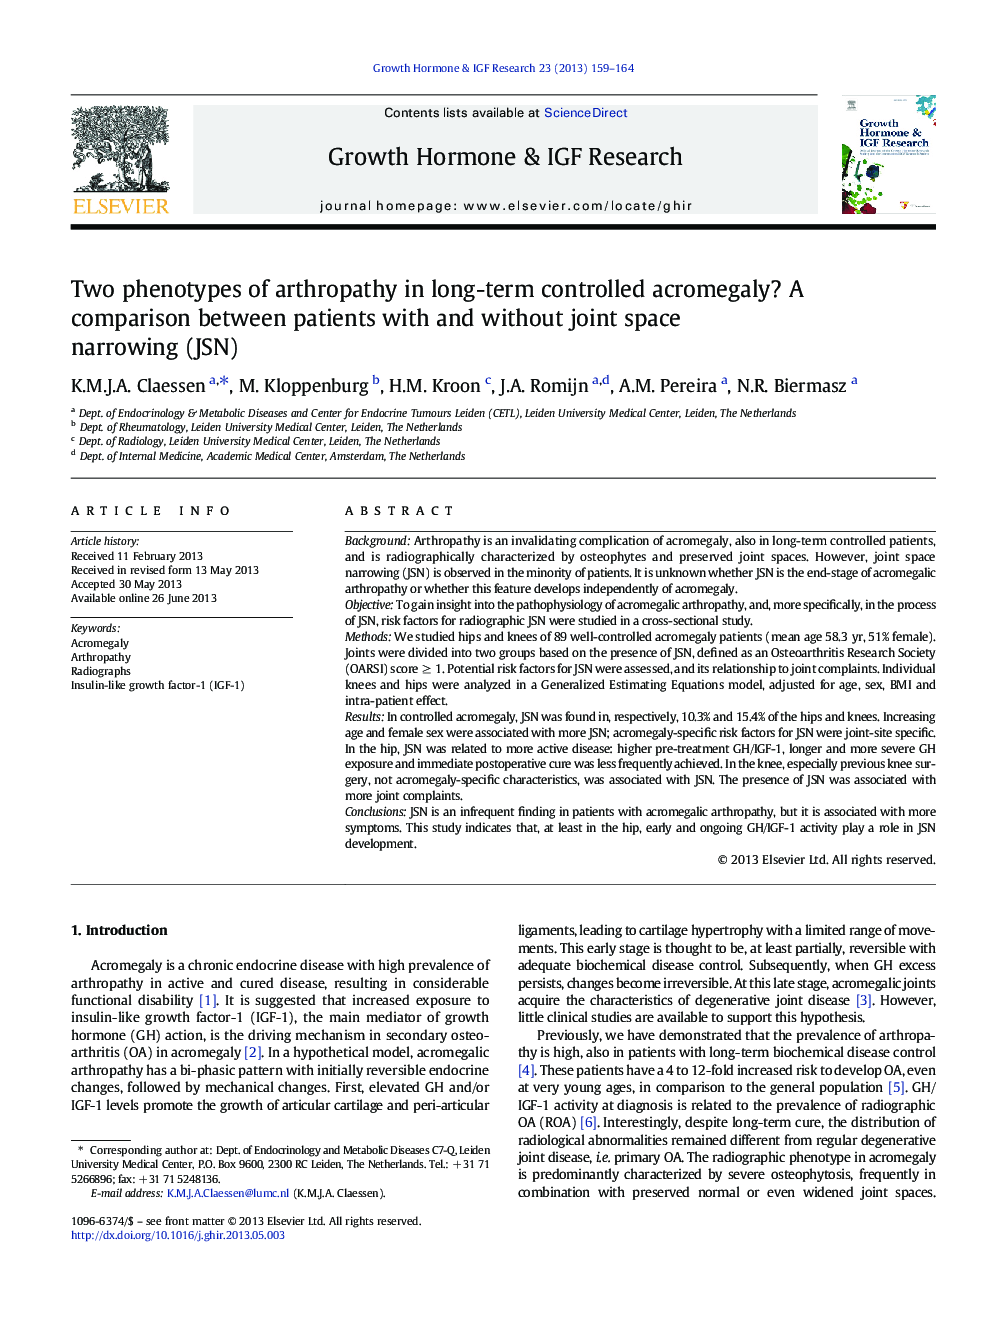 Two phenotypes of arthropathy in long-term controlled acromegaly? A comparison between patients with and without joint space narrowing (JSN)